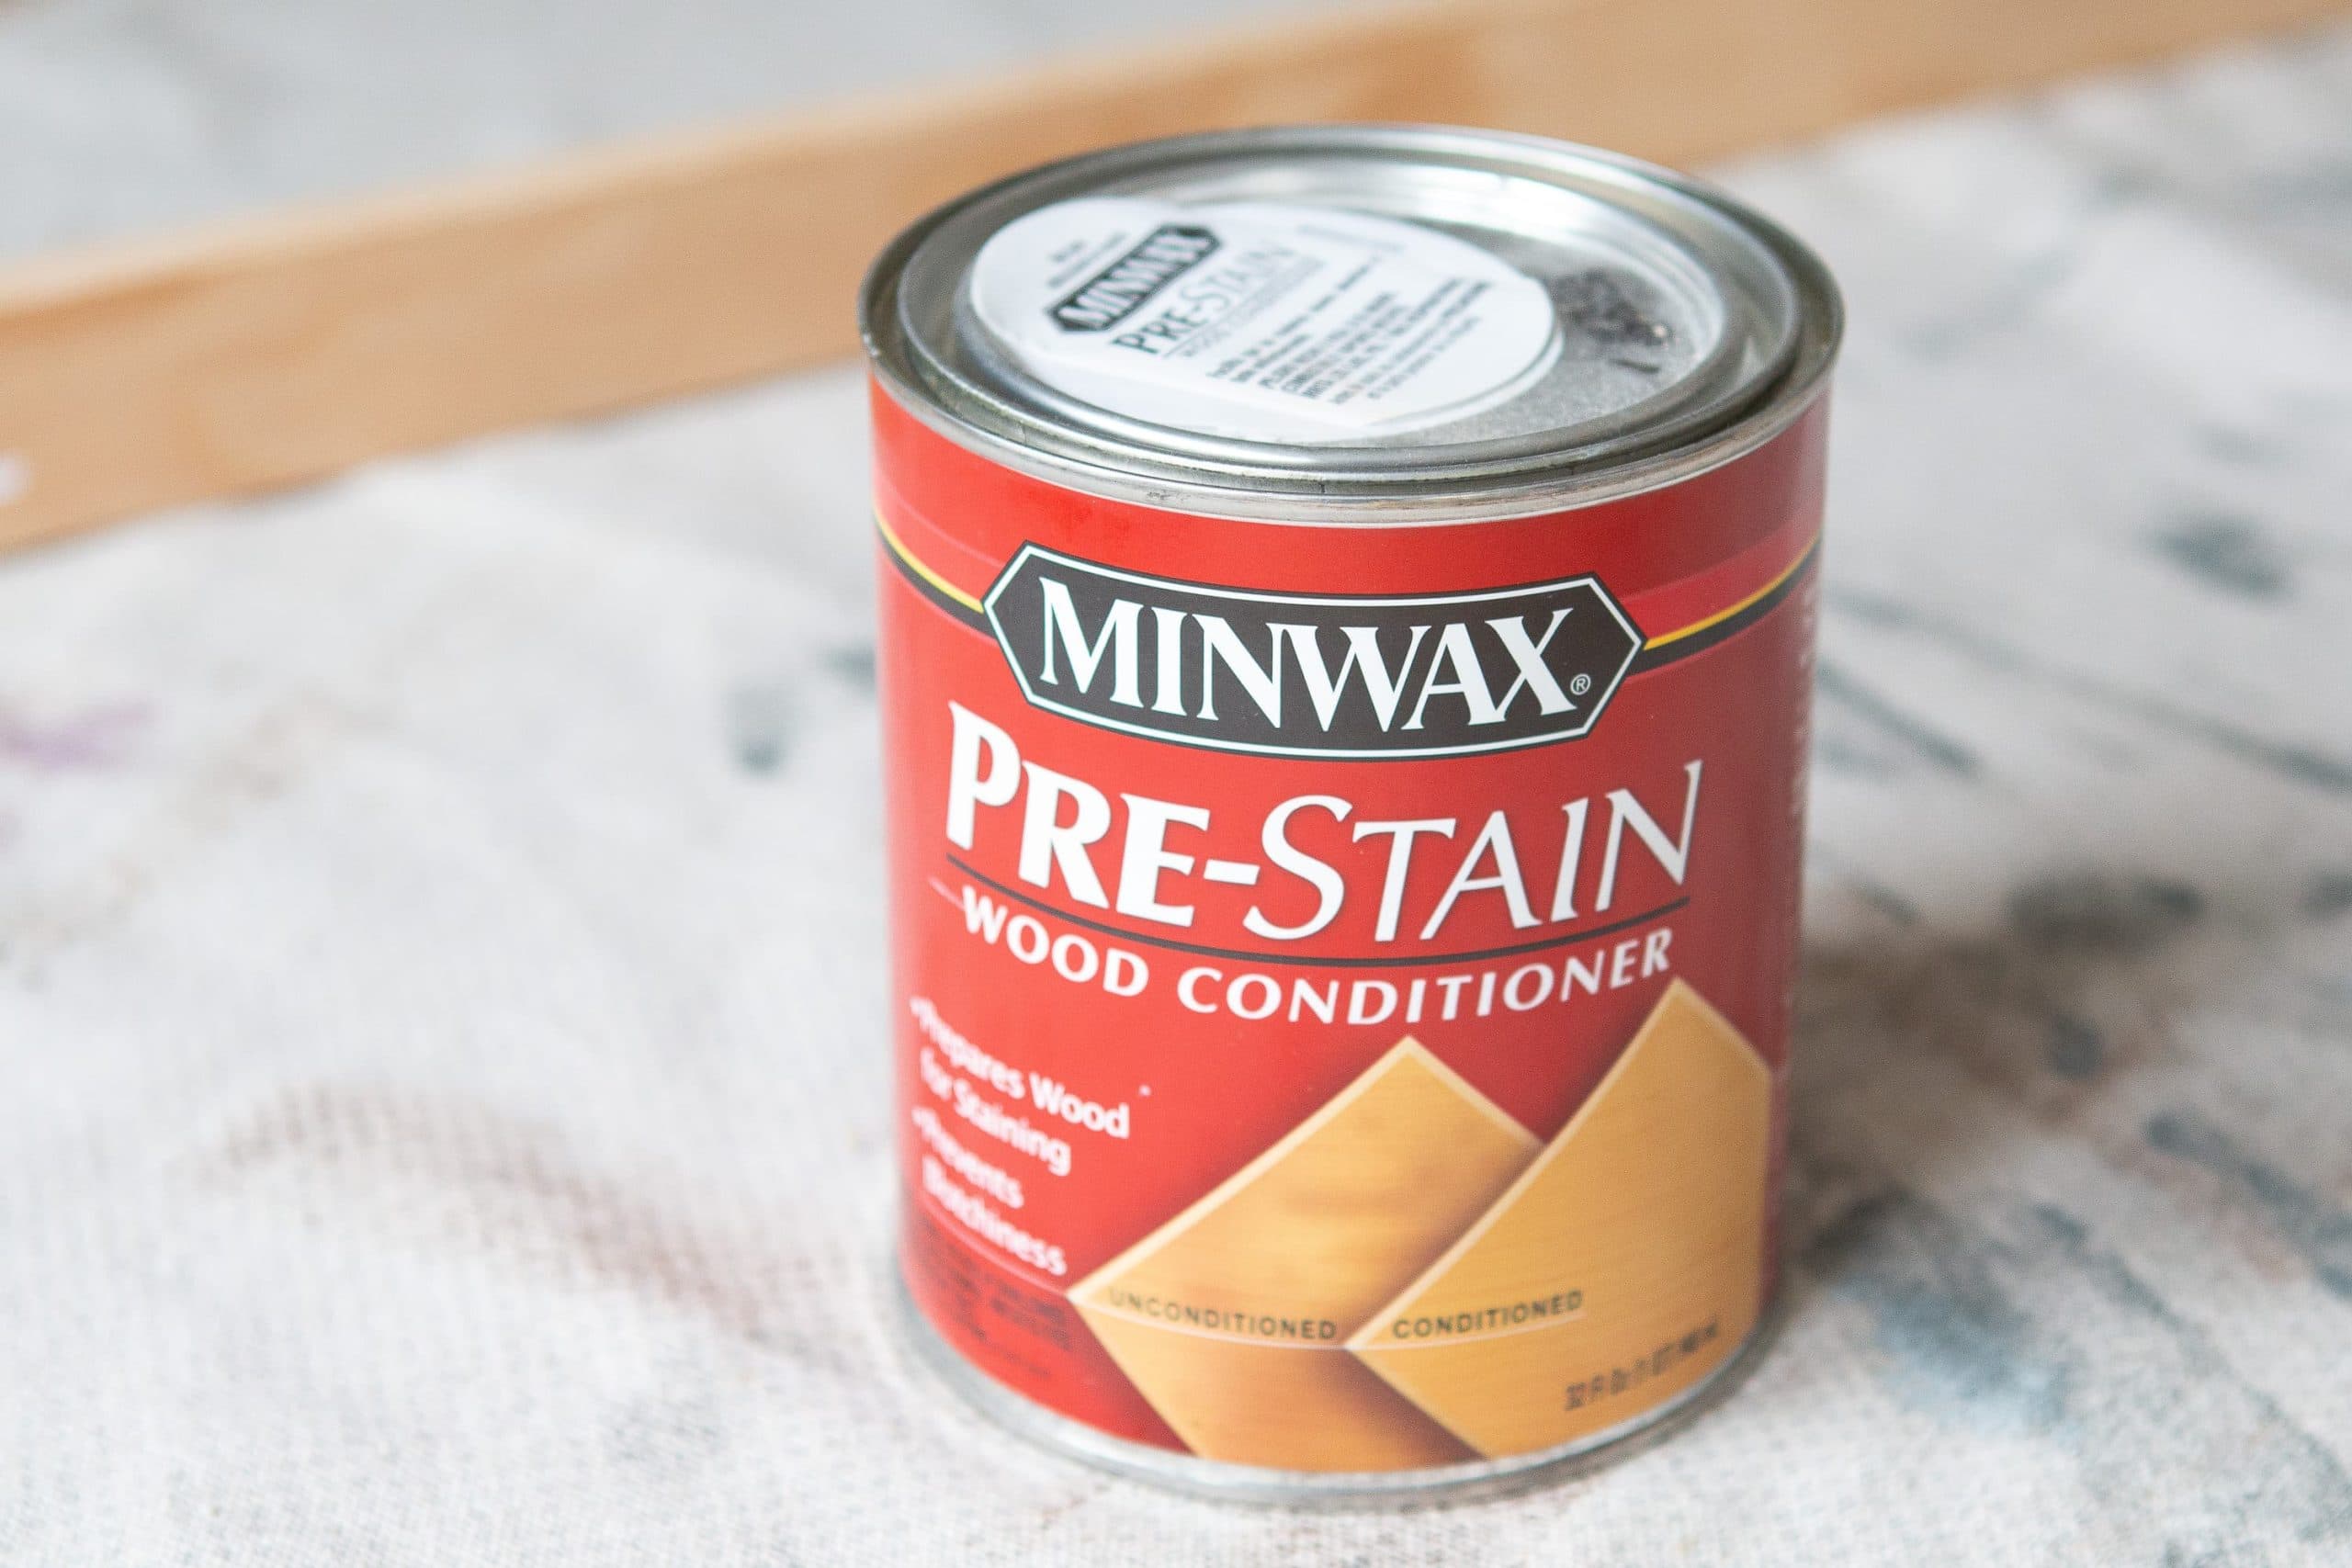 Pre-stain wood conditioner